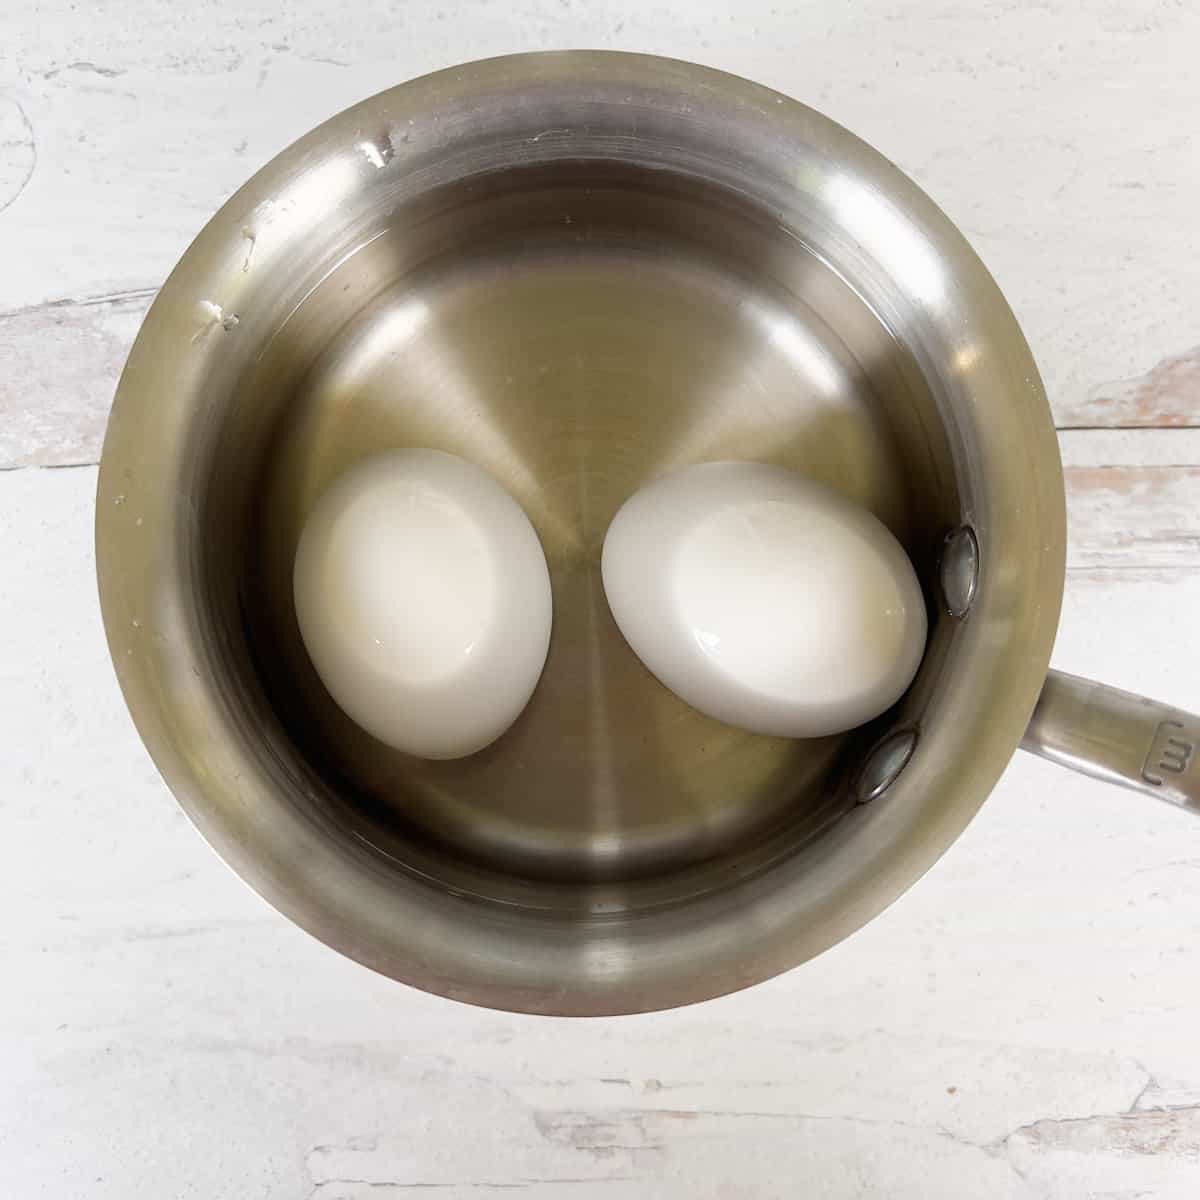 Two eggs boiling in saucepan.